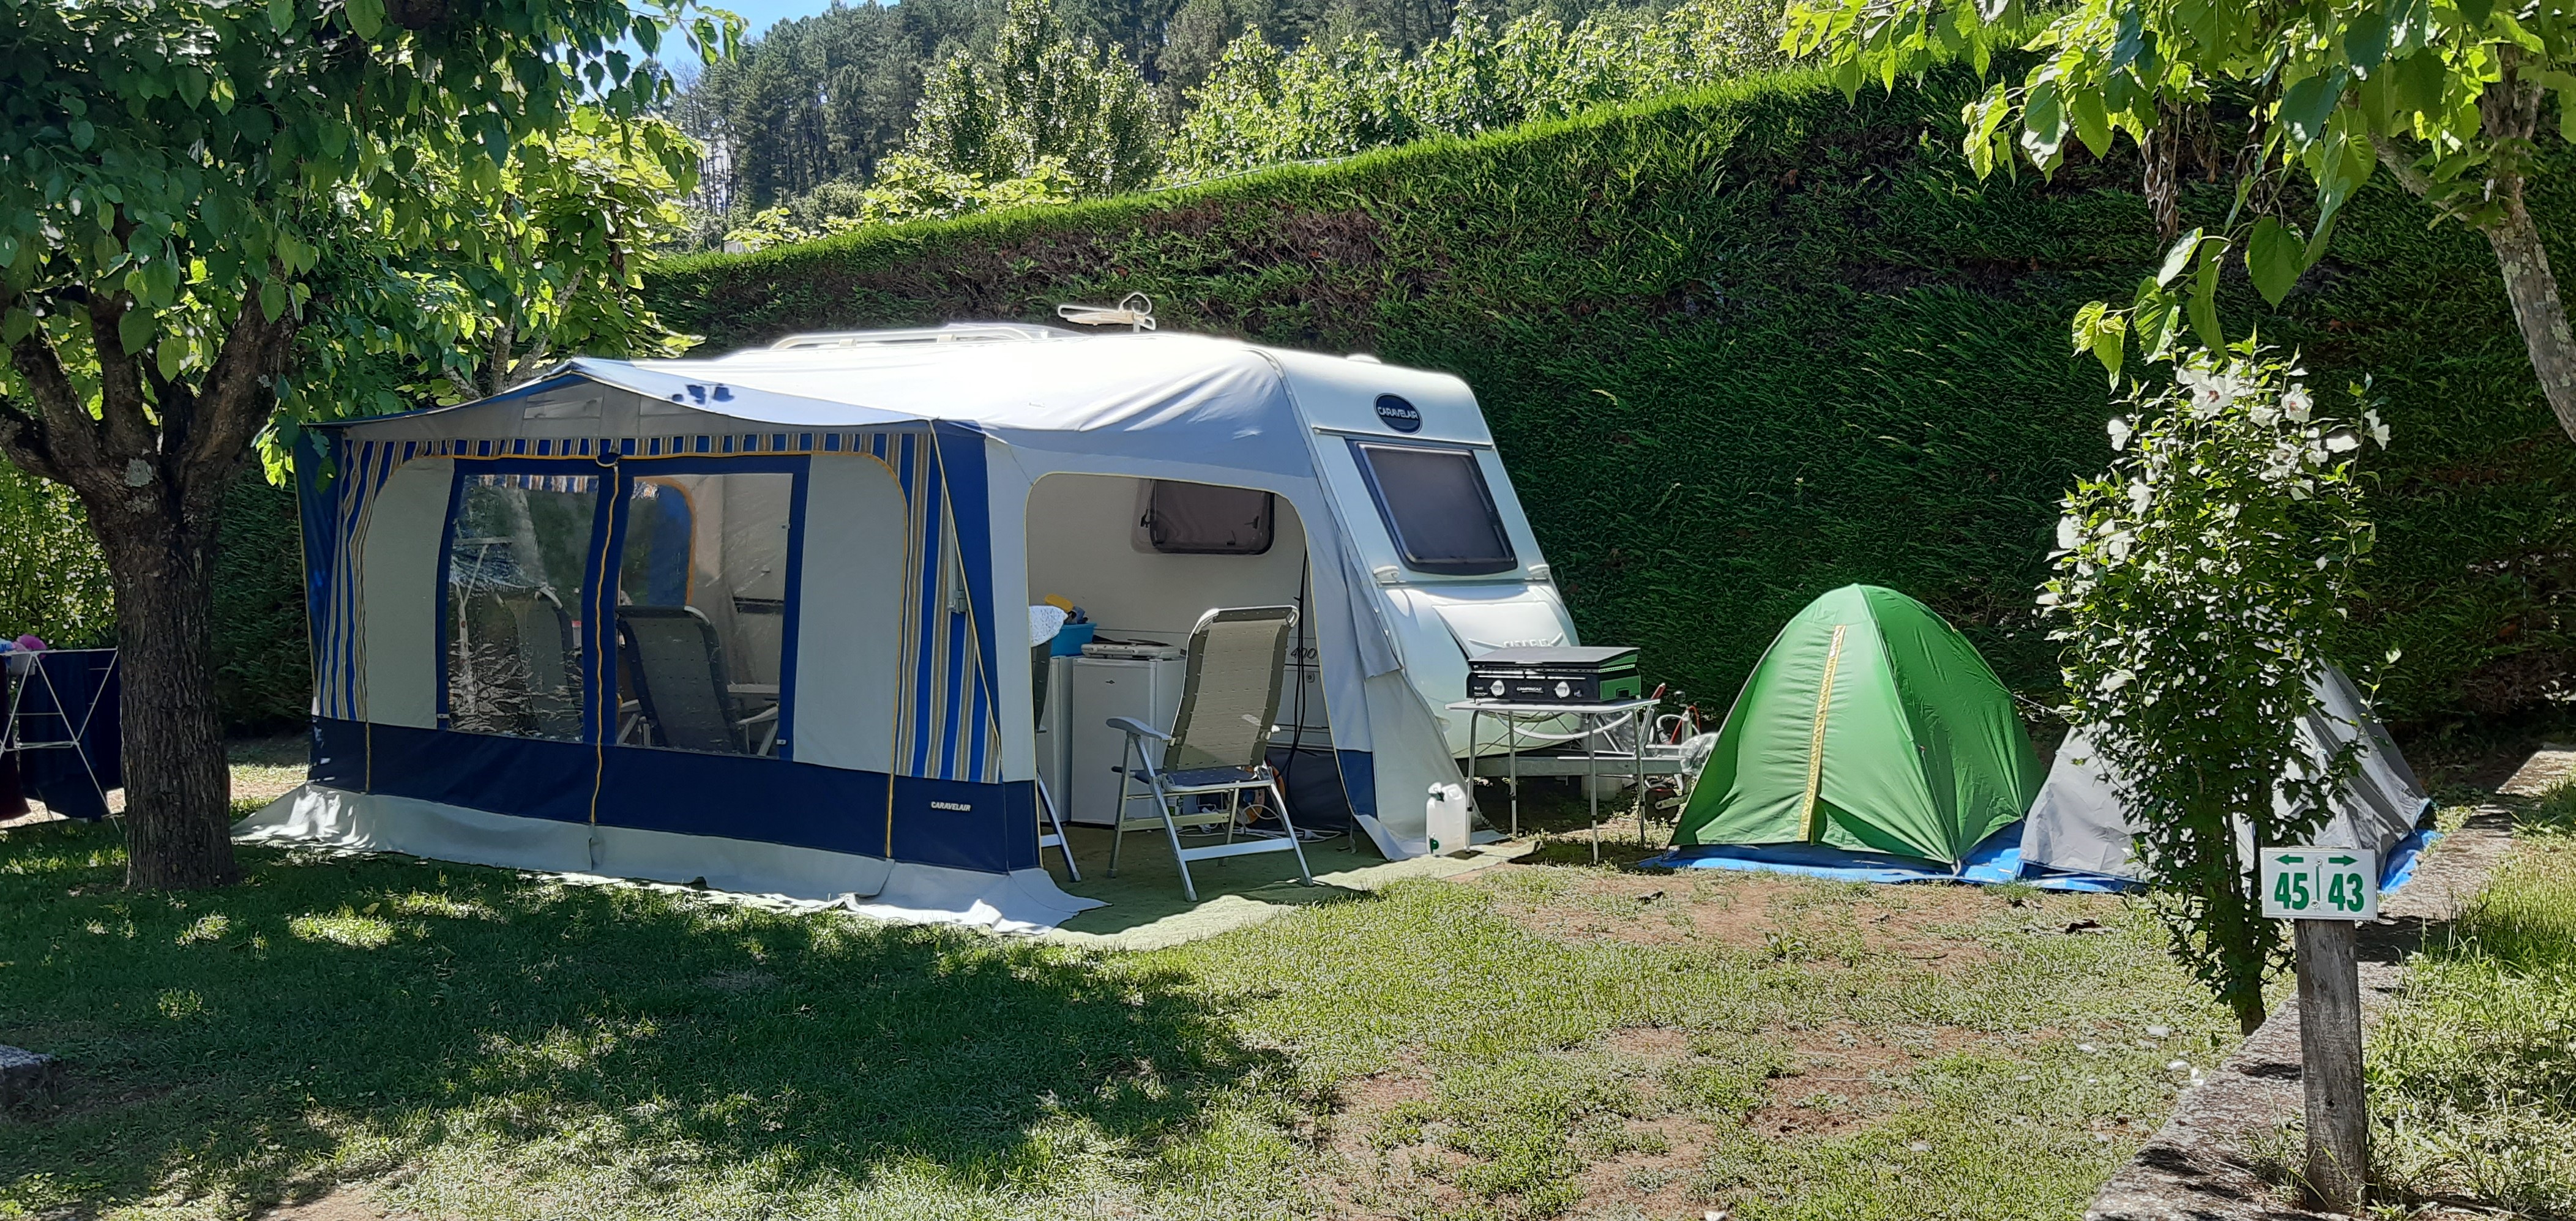 Emplacement - Emplacement - Camping Le Pastural